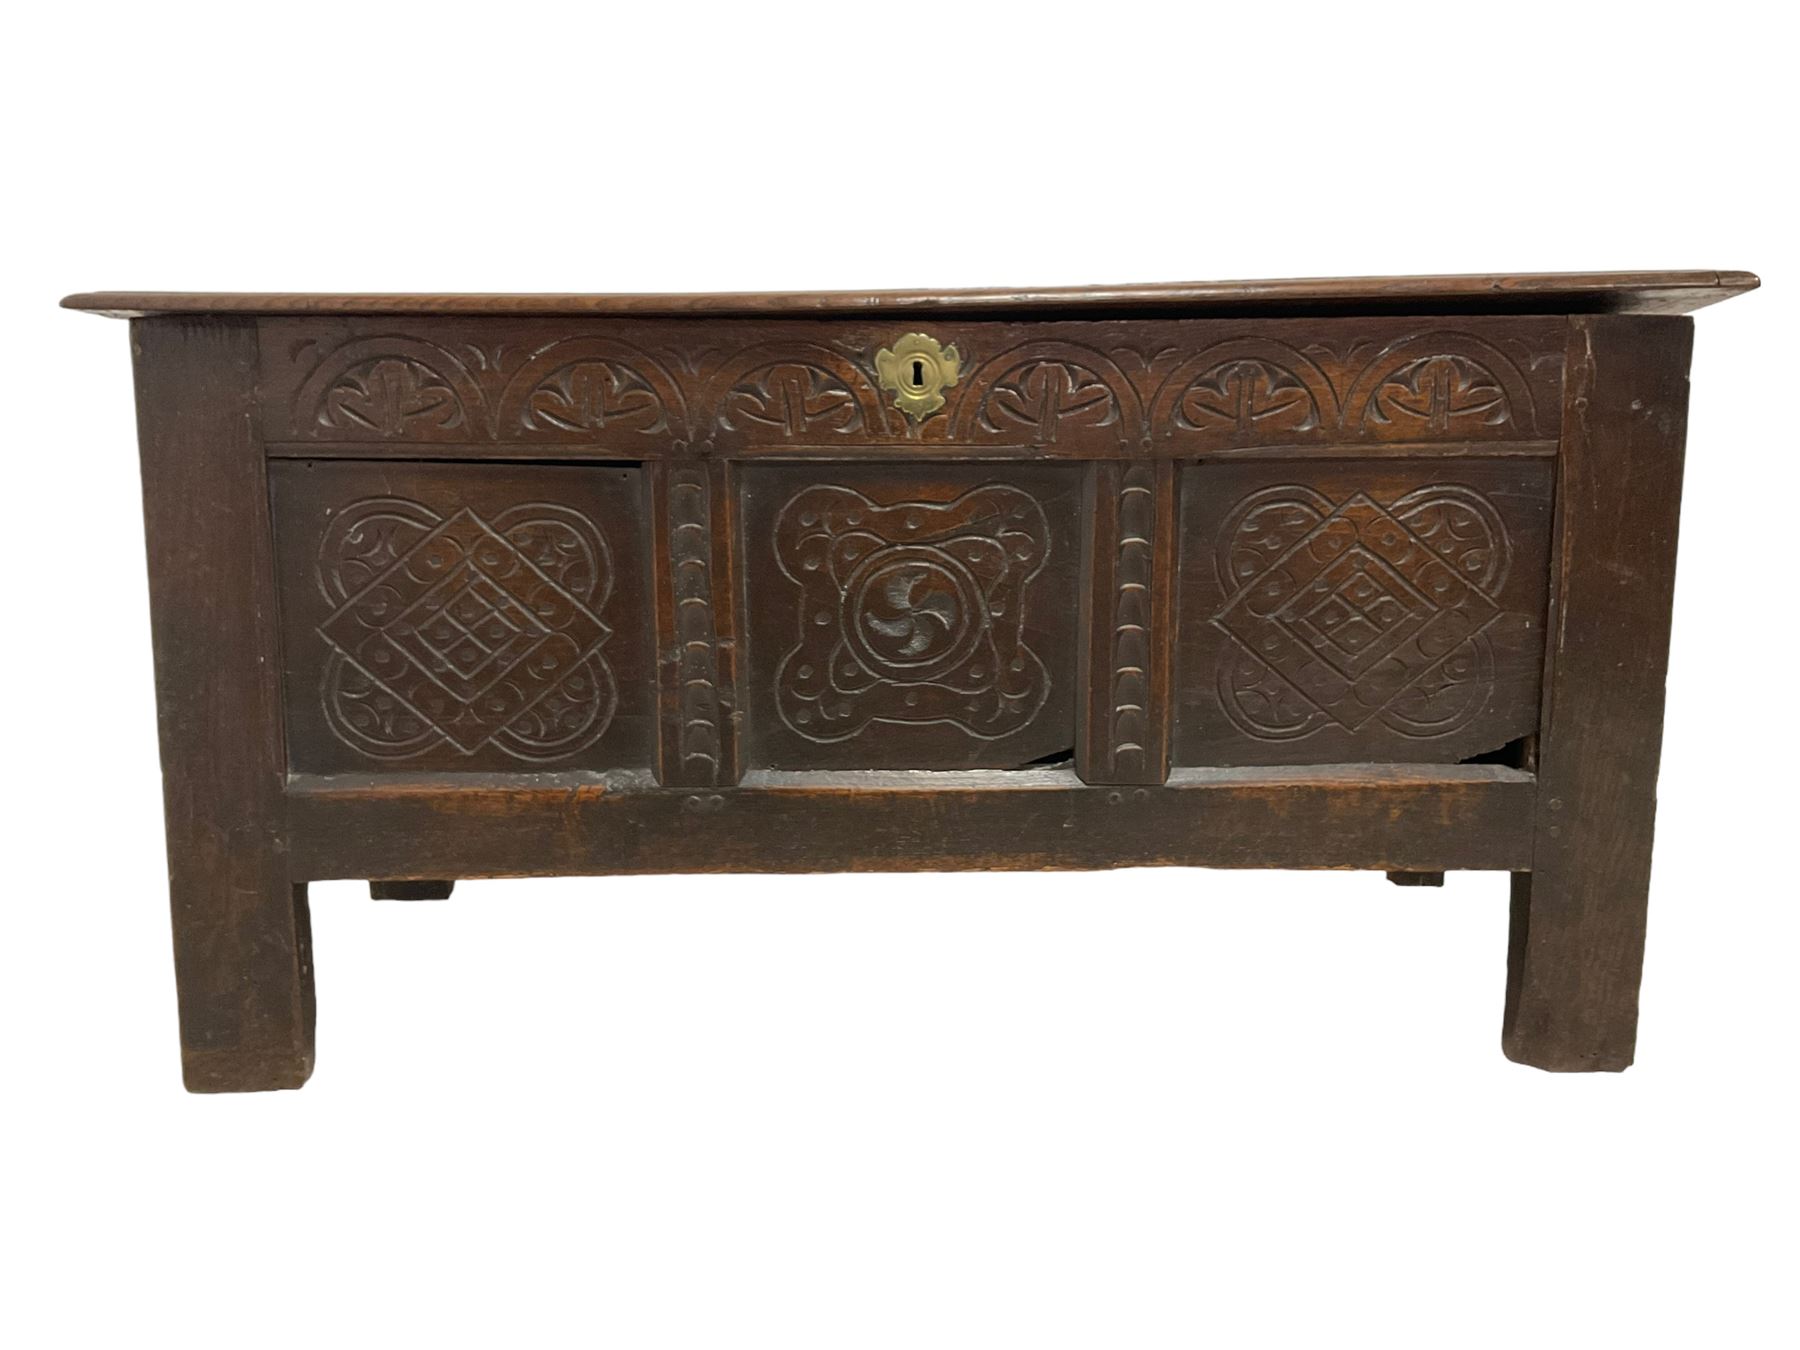 18th century oak coffer or chest - Image 4 of 6